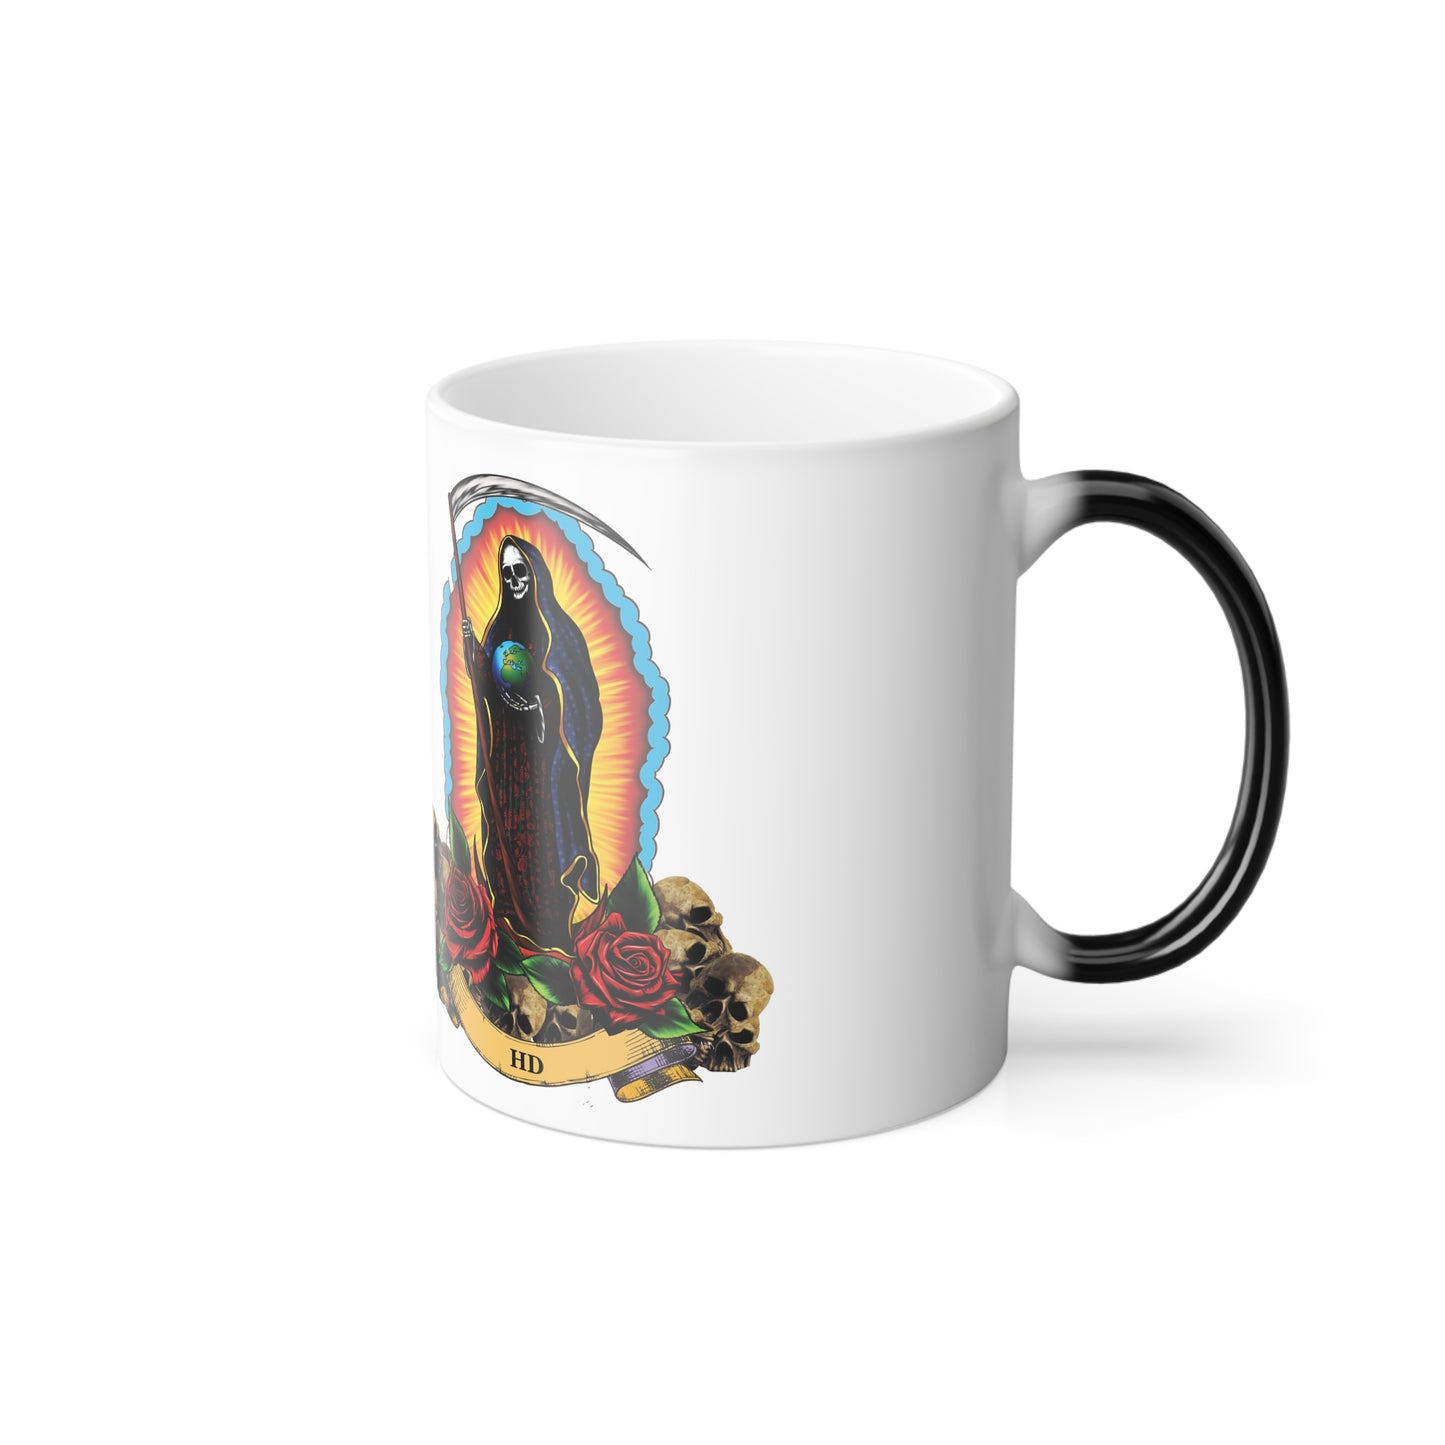 Holy Death with Blue Halo Color Morphing Mug, 11oz